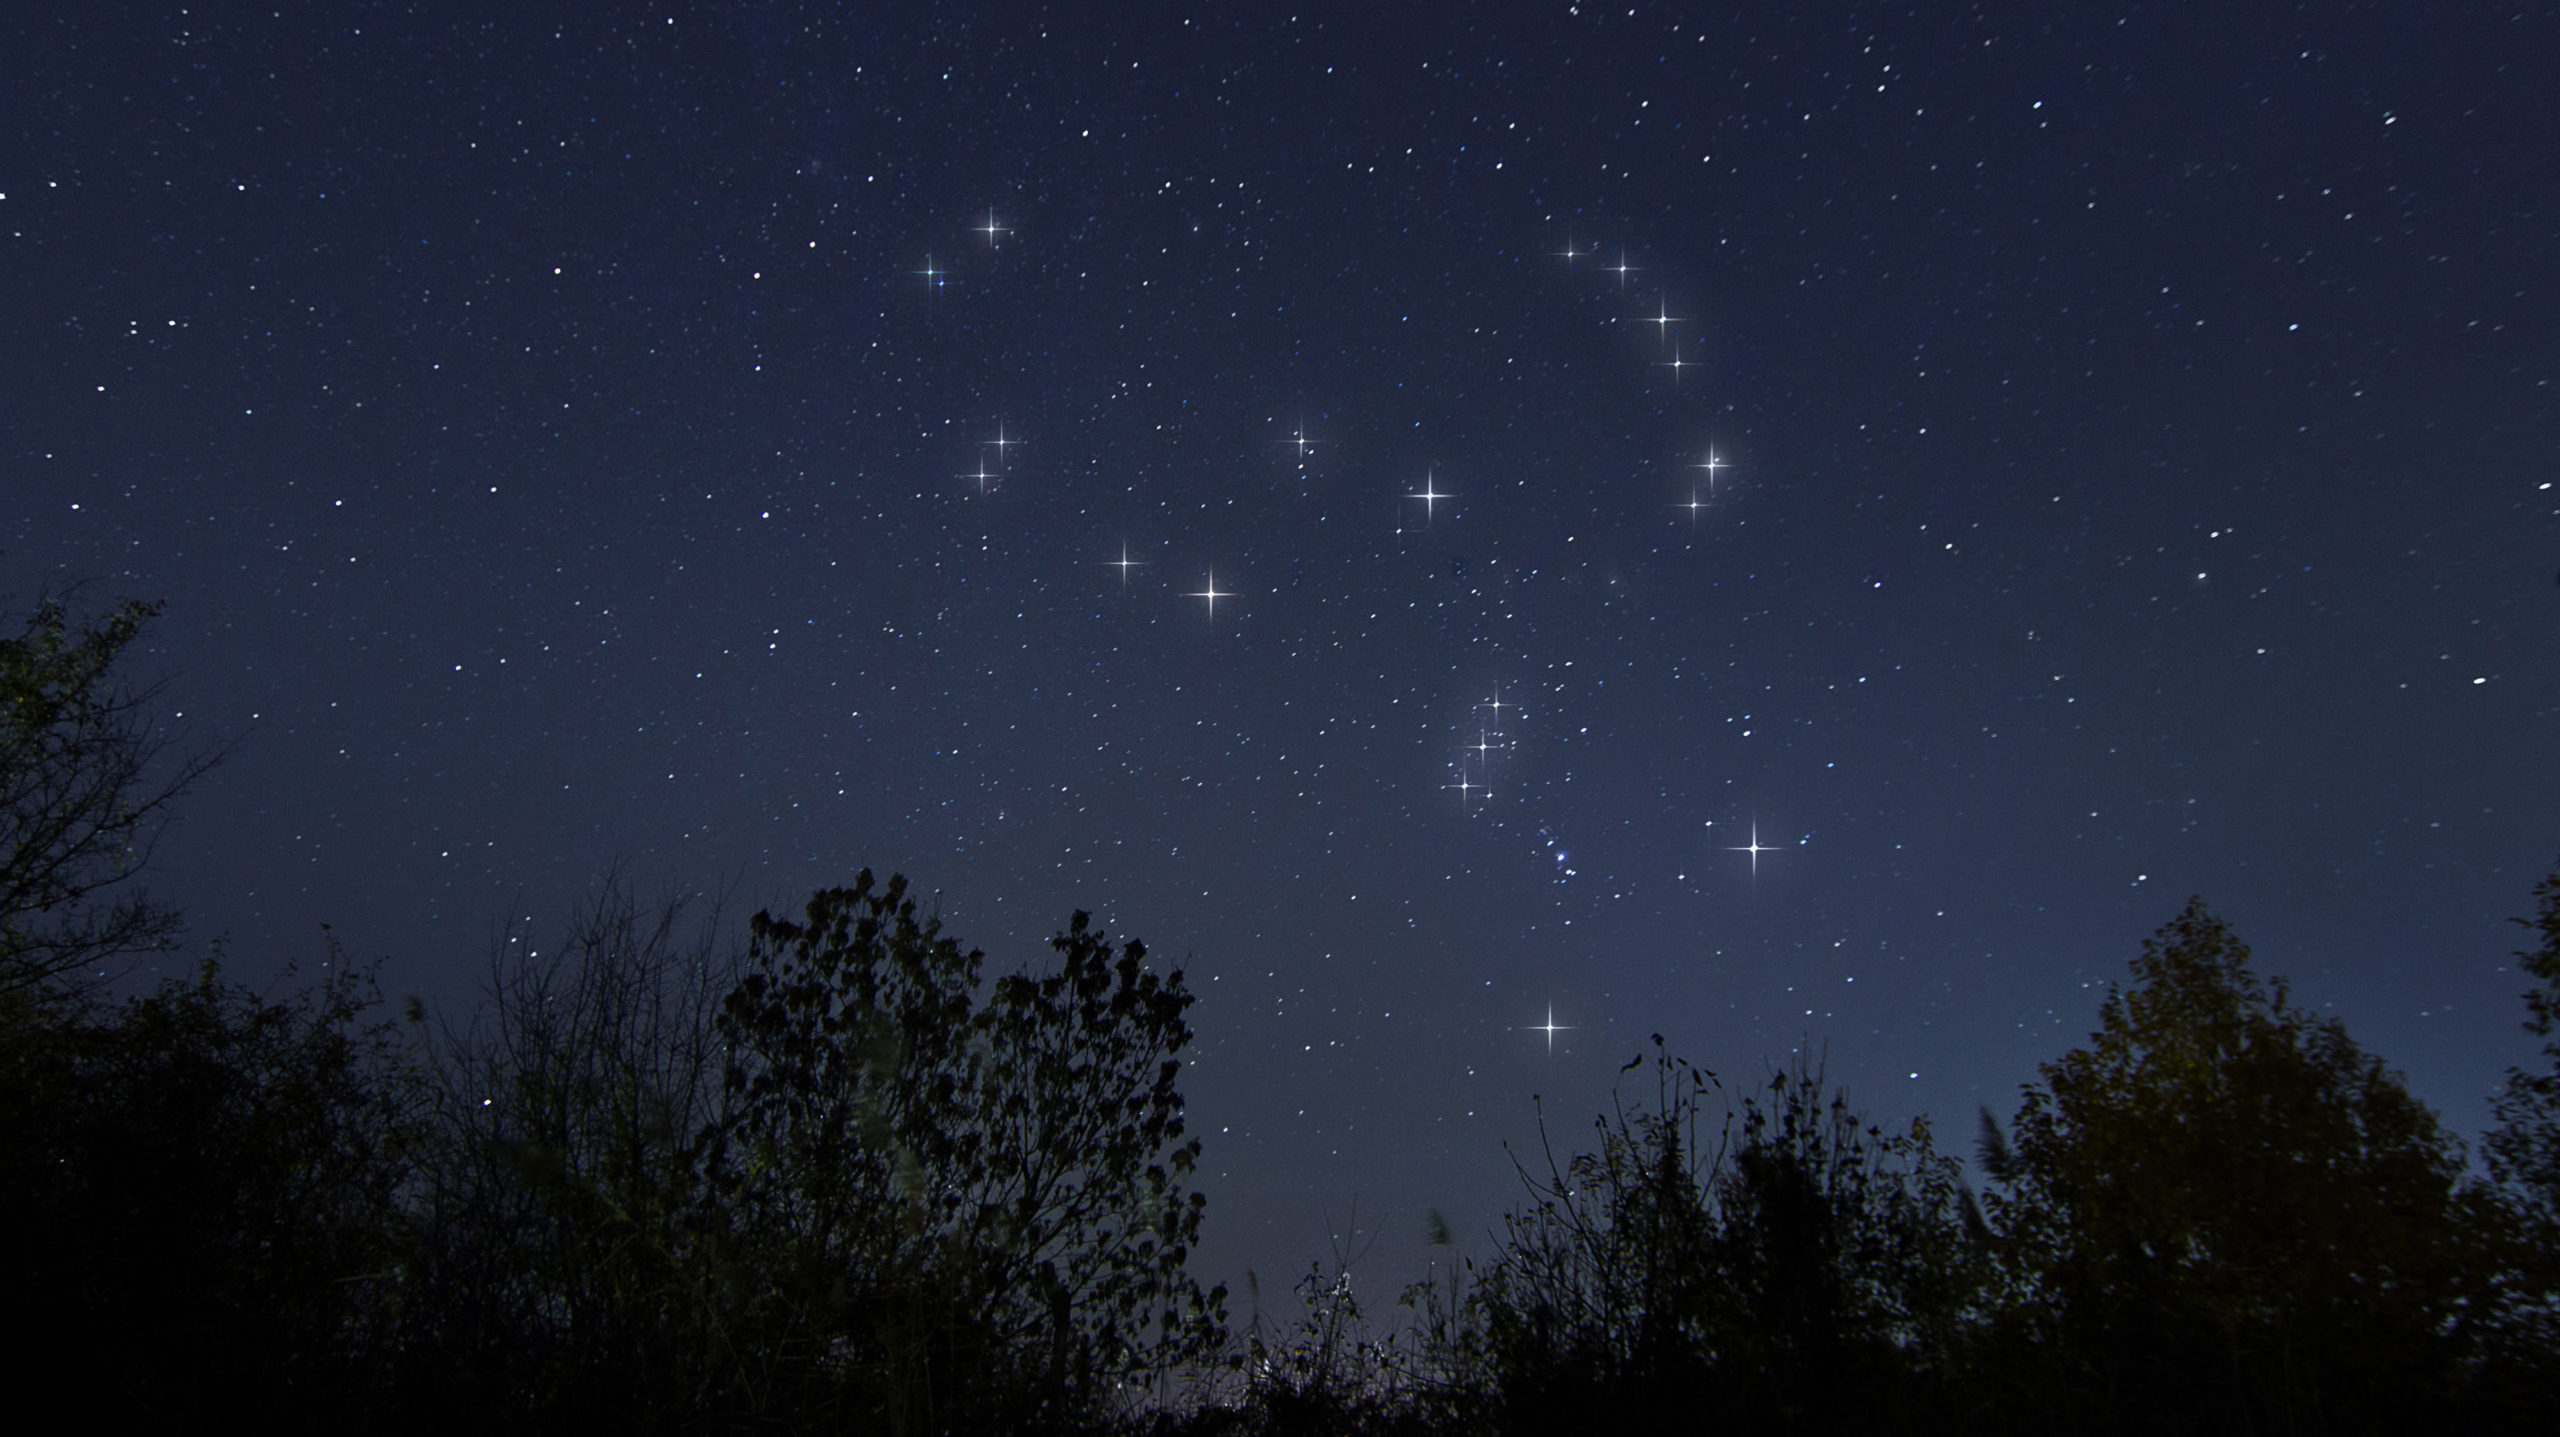 Use Orion’s Belt to Easily Spot Sirius This Month (If You’re In The Northern Hemisphere)